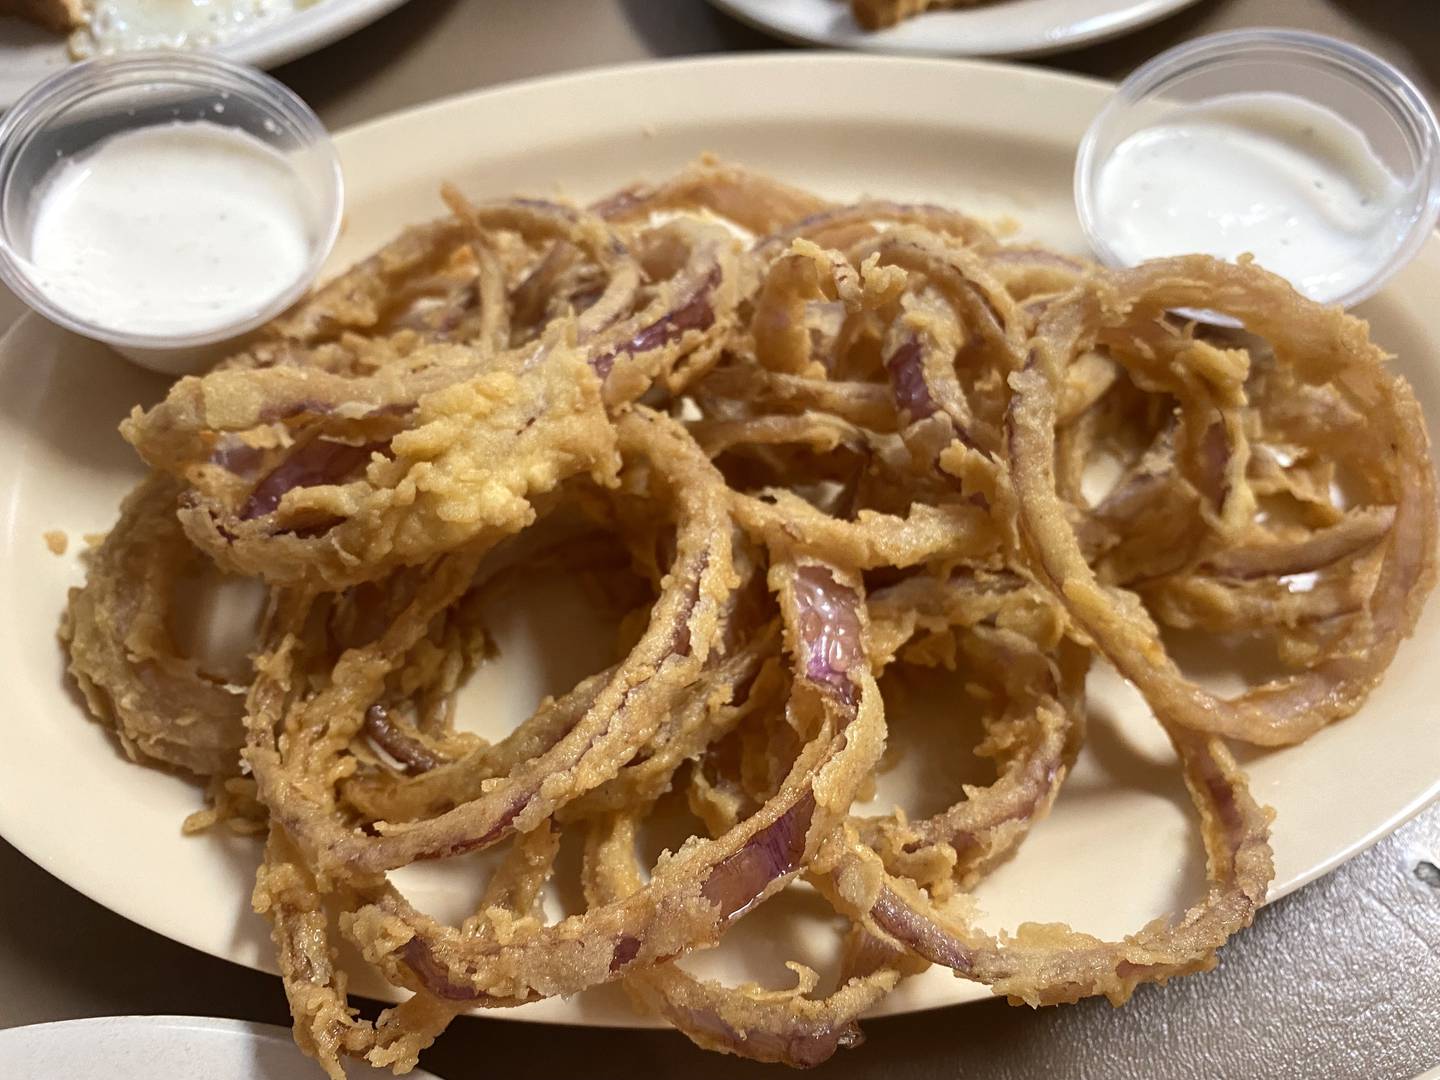 Victoria's Country Diner's made-in-house onion rings cost a little more than the regular onion rings, but light on the breading and strong on the sweet onion flavor, they are most definitely worth it.